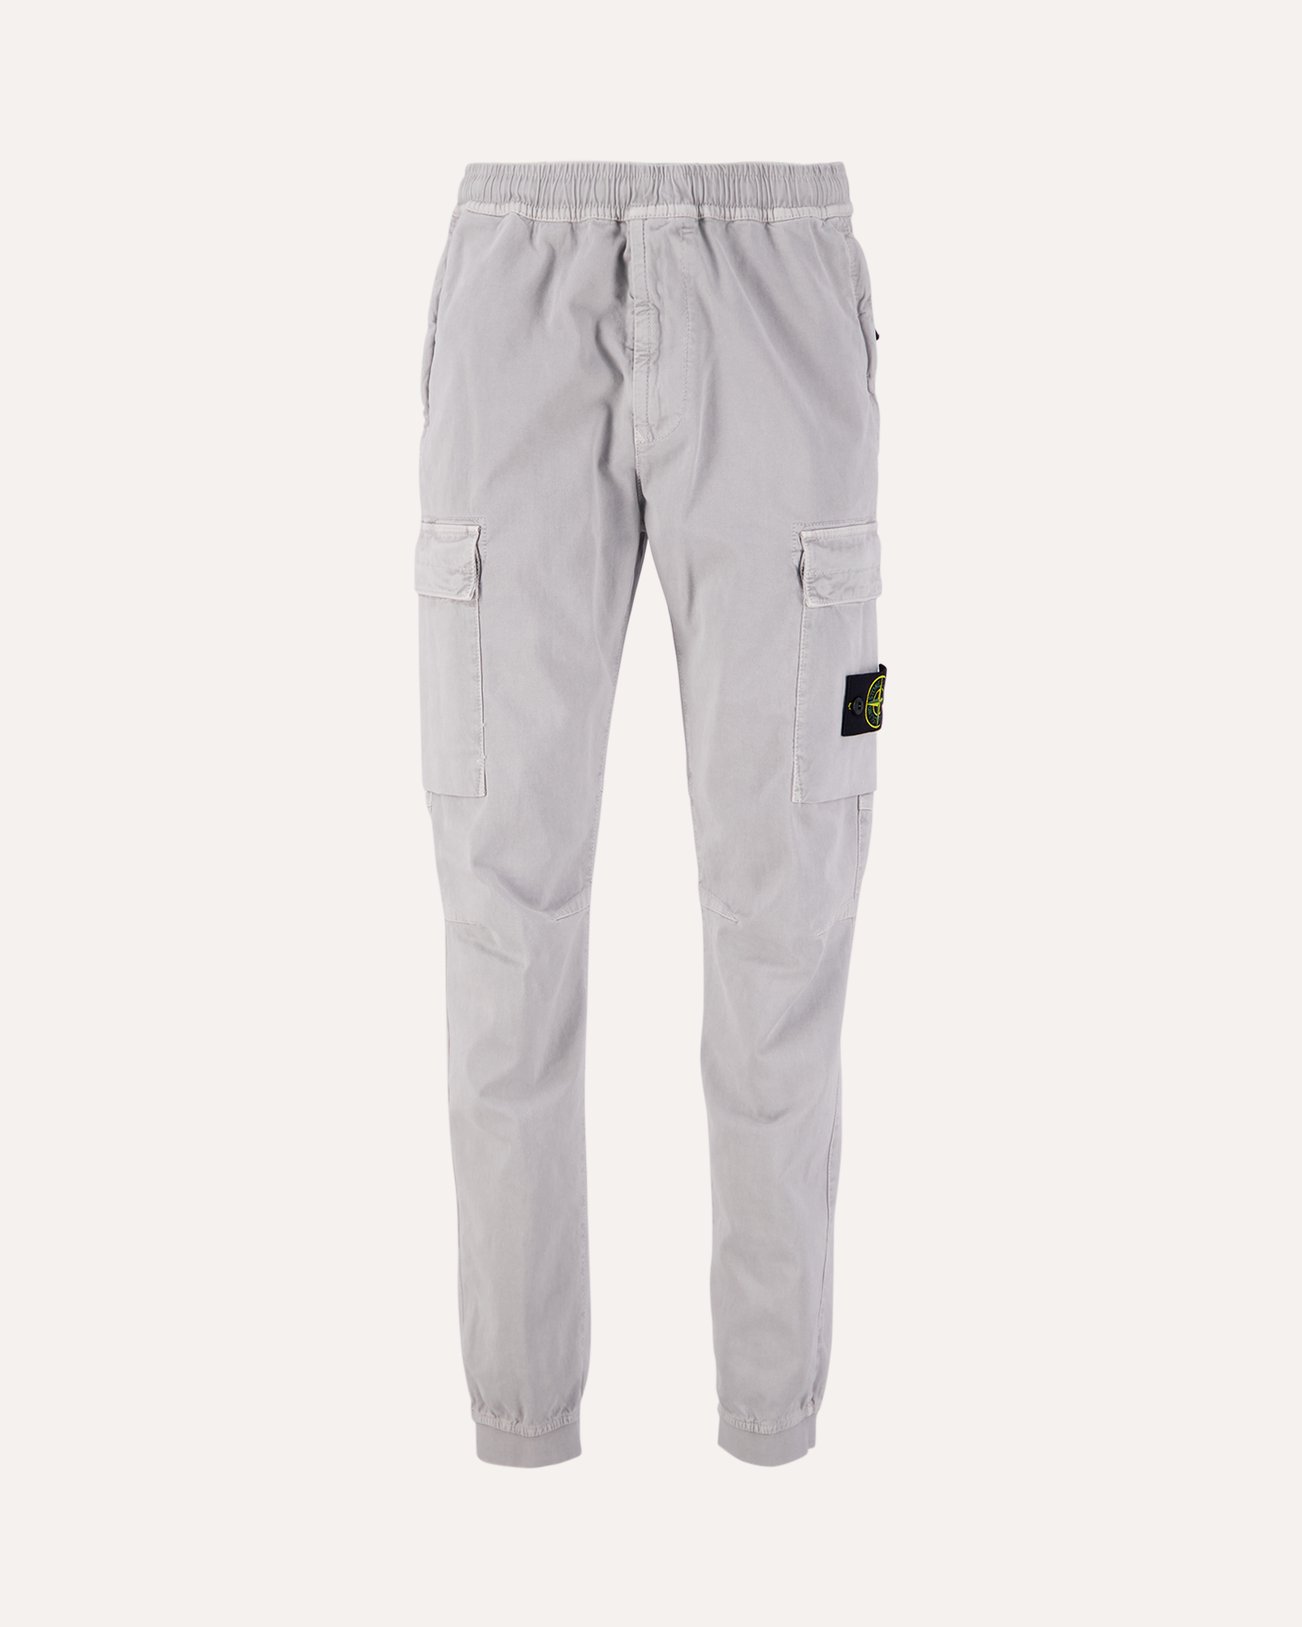 Stone Island 313L1 Cotton Twill Garment Dyed 'Old'Effect Cargo Pants GRIJS 1